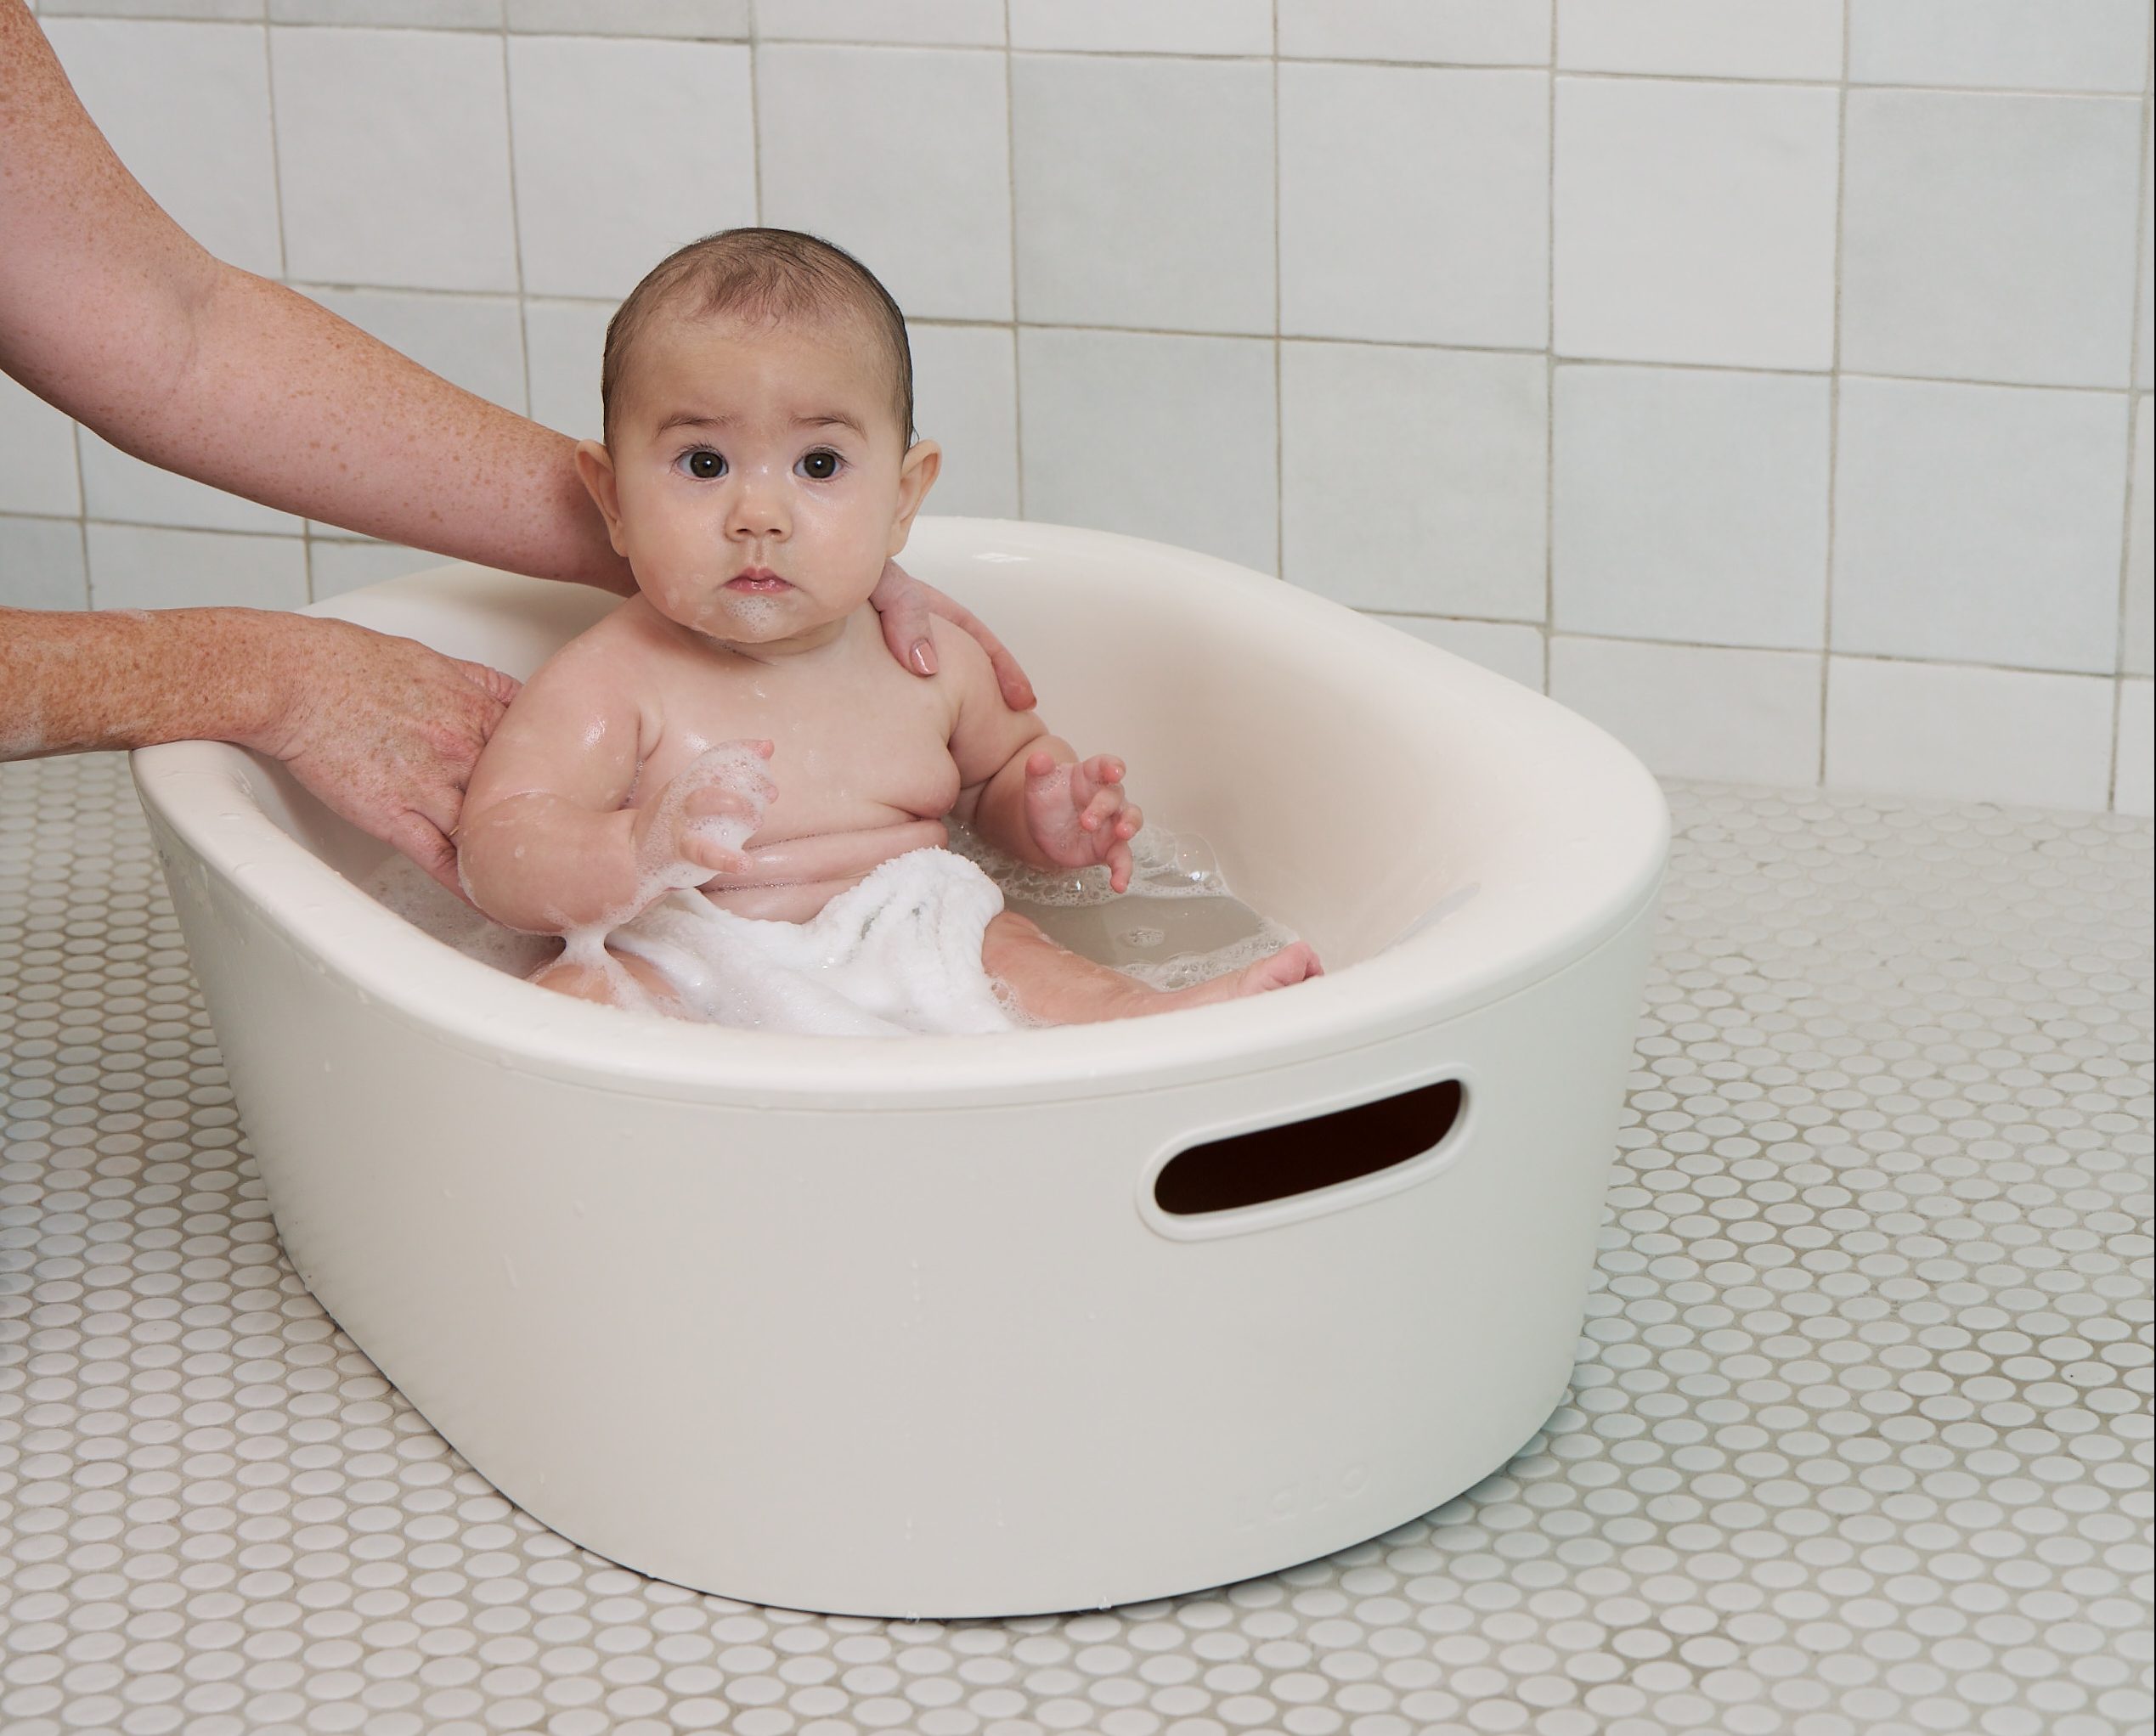 Why some high-value baby products are 'recession-proof' - Modern